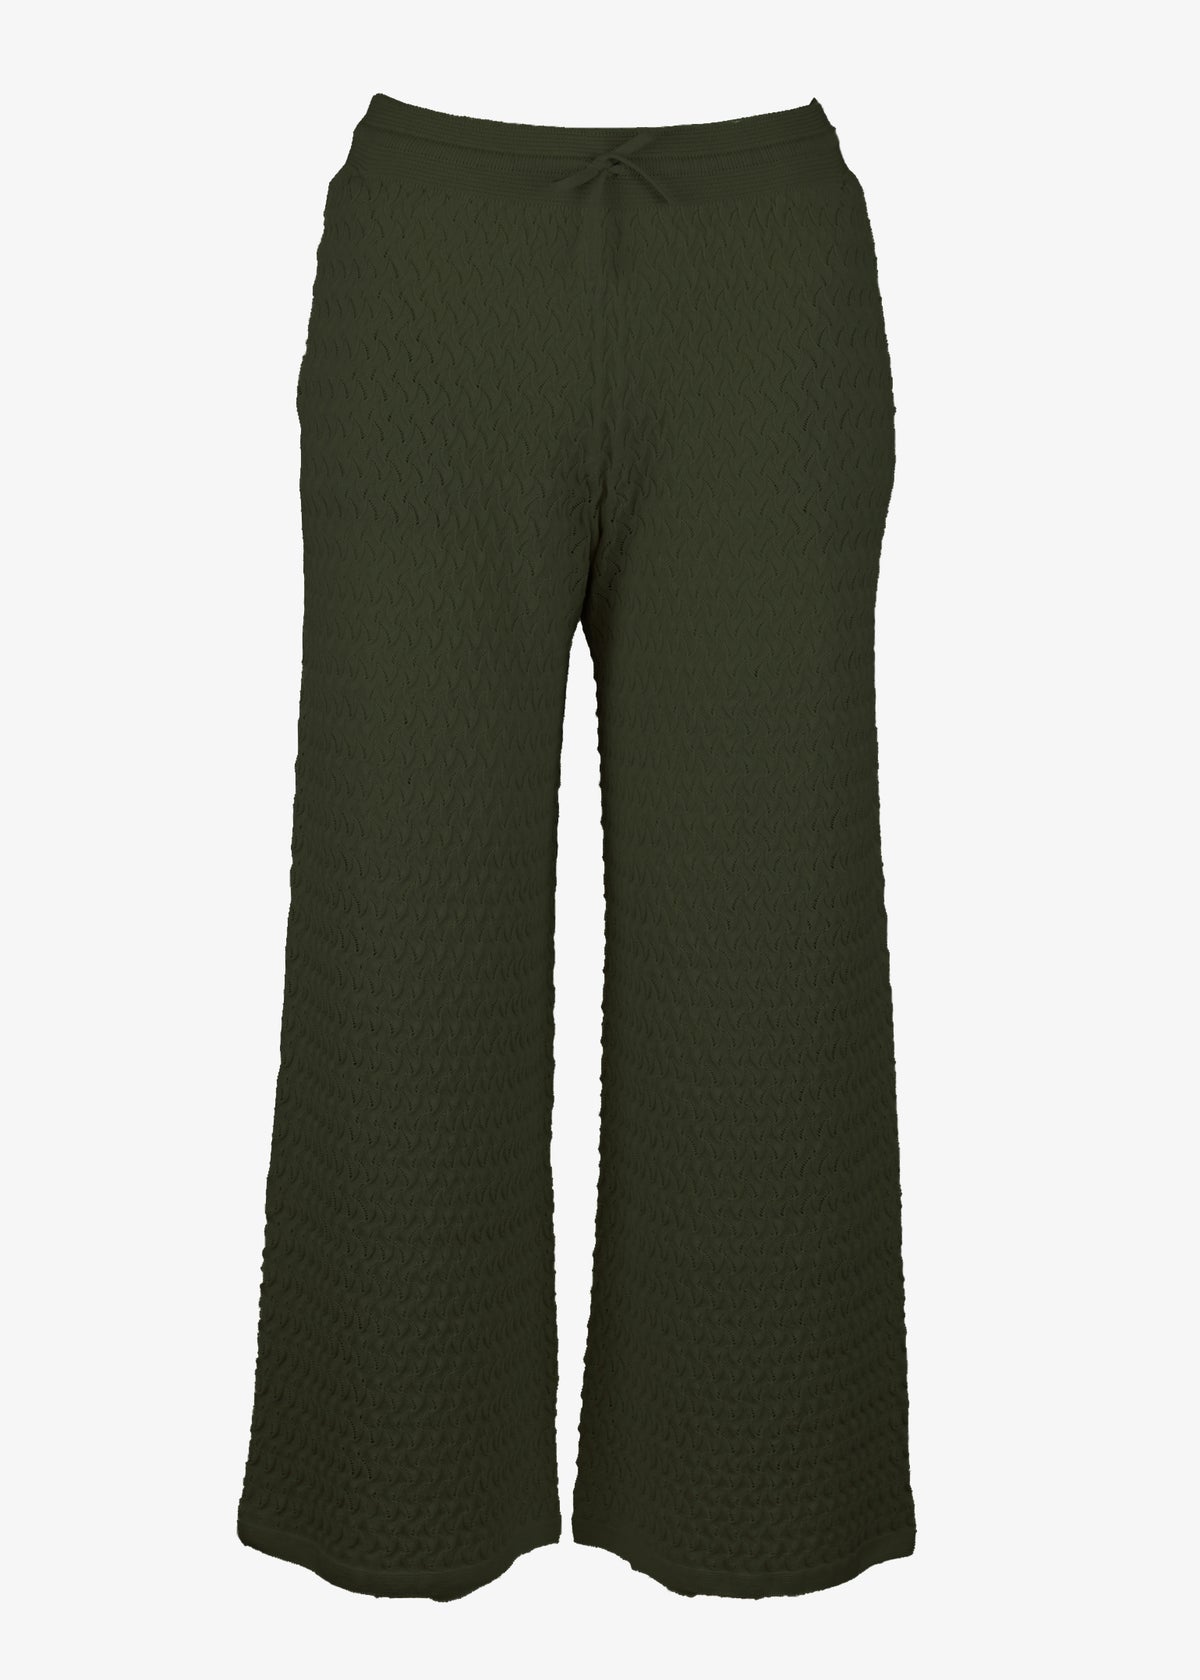 The Pointelle Knit Pants